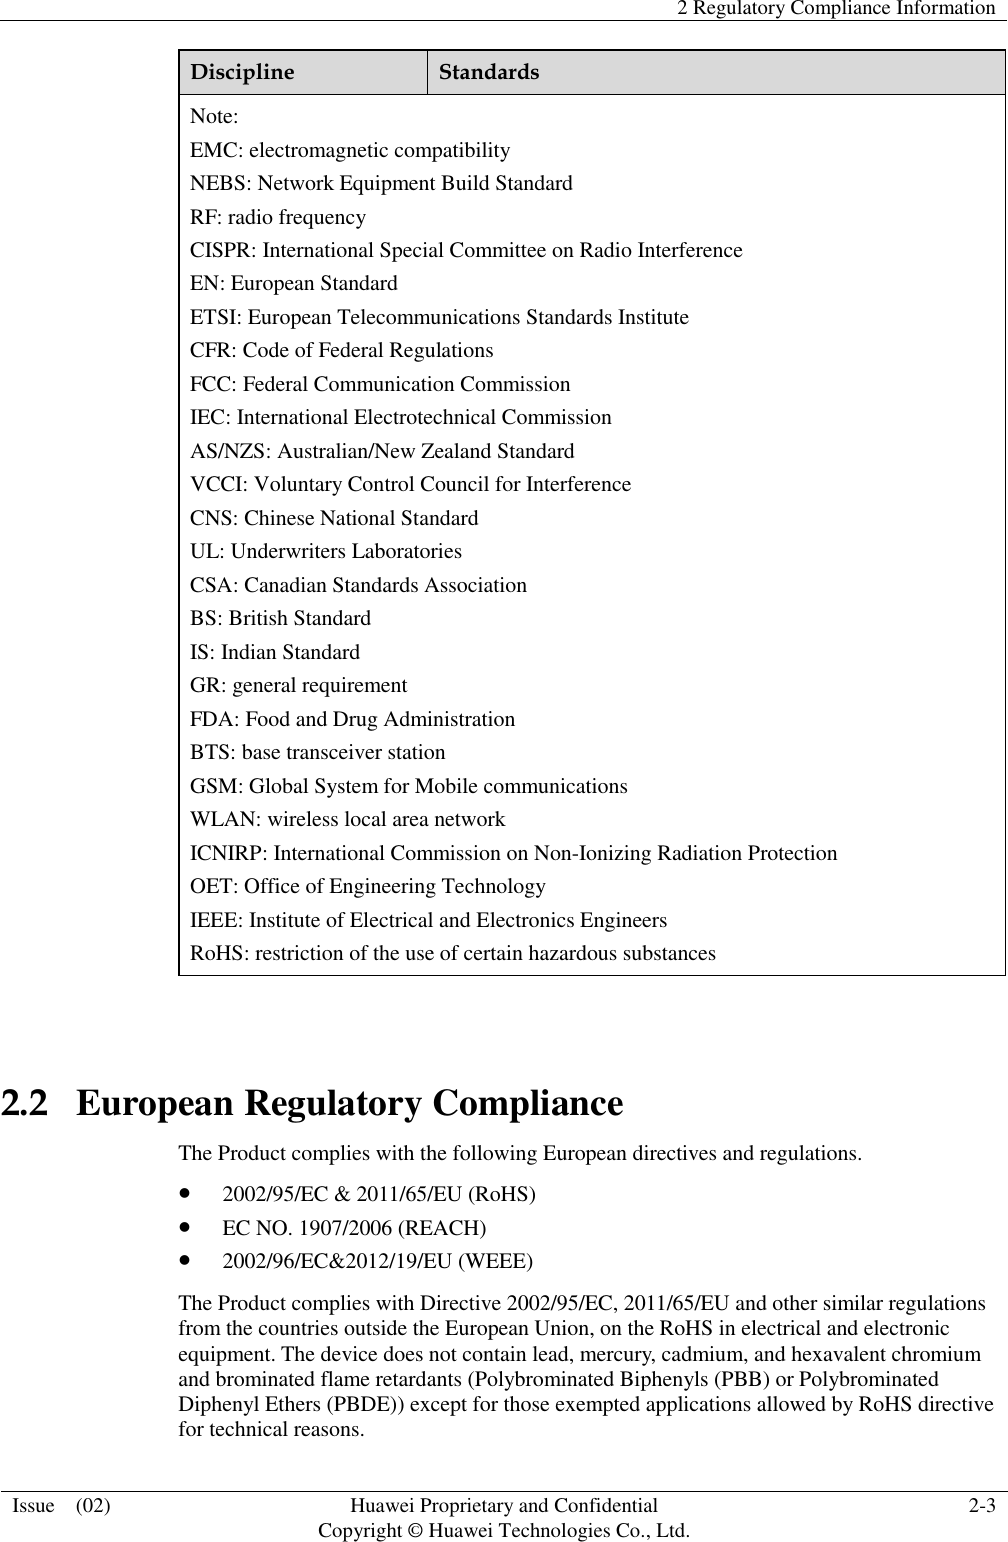   2 Regulatory Compliance Information  Issue    (02) Huawei Proprietary and Confidential                                     Copyright © Huawei Technologies Co., Ltd. 2-3  Discipline Standards Note: EMC: electromagnetic compatibility NEBS: Network Equipment Build Standard RF: radio frequency CISPR: International Special Committee on Radio Interference EN: European Standard ETSI: European Telecommunications Standards Institute CFR: Code of Federal Regulations FCC: Federal Communication Commission IEC: International Electrotechnical Commission AS/NZS: Australian/New Zealand Standard VCCI: Voluntary Control Council for Interference CNS: Chinese National Standard UL: Underwriters Laboratories CSA: Canadian Standards Association BS: British Standard IS: Indian Standard GR: general requirement FDA: Food and Drug Administration BTS: base transceiver station GSM: Global System for Mobile communications WLAN: wireless local area network ICNIRP: International Commission on Non-Ionizing Radiation Protection OET: Office of Engineering Technology IEEE: Institute of Electrical and Electronics Engineers RoHS: restriction of the use of certain hazardous substances  2.2   European Regulatory Compliance The Product complies with the following European directives and regulations.  2002/95/EC &amp; 2011/65/EU (RoHS)  EC NO. 1907/2006 (REACH)  2002/96/EC&amp;2012/19/EU (WEEE) The Product complies with Directive 2002/95/EC, 2011/65/EU and other similar regulations from the countries outside the European Union, on the RoHS in electrical and electronic equipment. The device does not contain lead, mercury, cadmium, and hexavalent chromium and brominated flame retardants (Polybrominated Biphenyls (PBB) or Polybrominated Diphenyl Ethers (PBDE)) except for those exempted applications allowed by RoHS directive for technical reasons.   